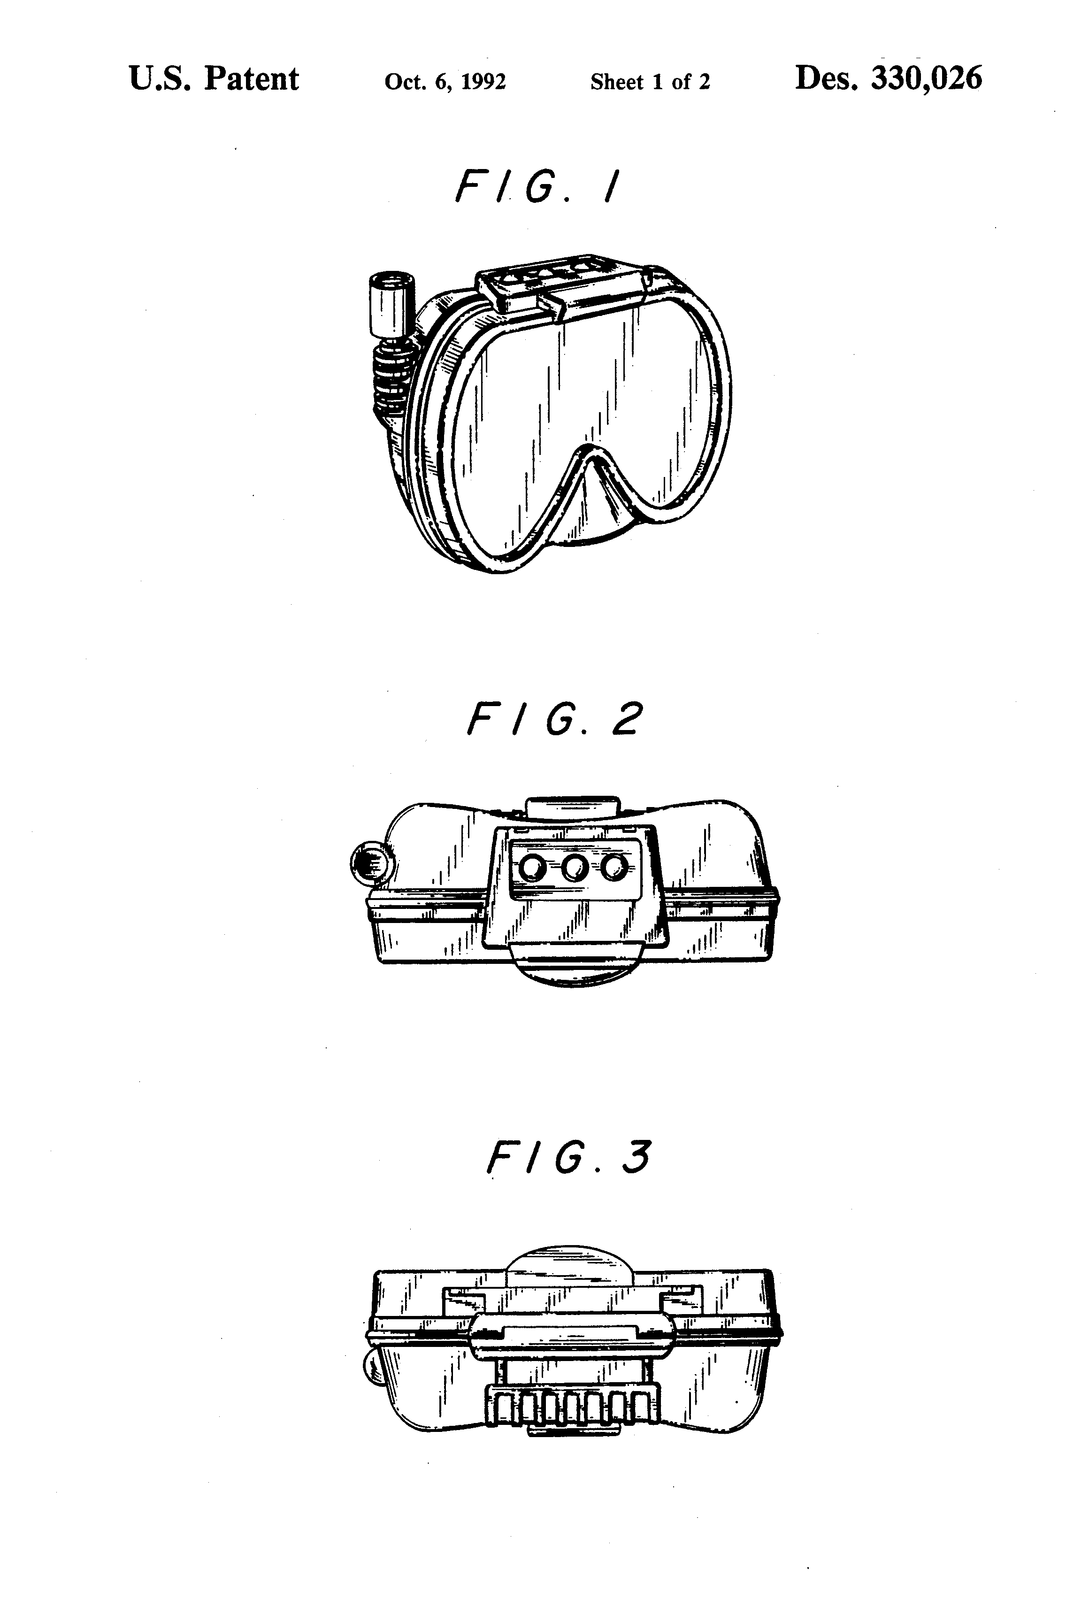 USD330026-drawings-page-2.png